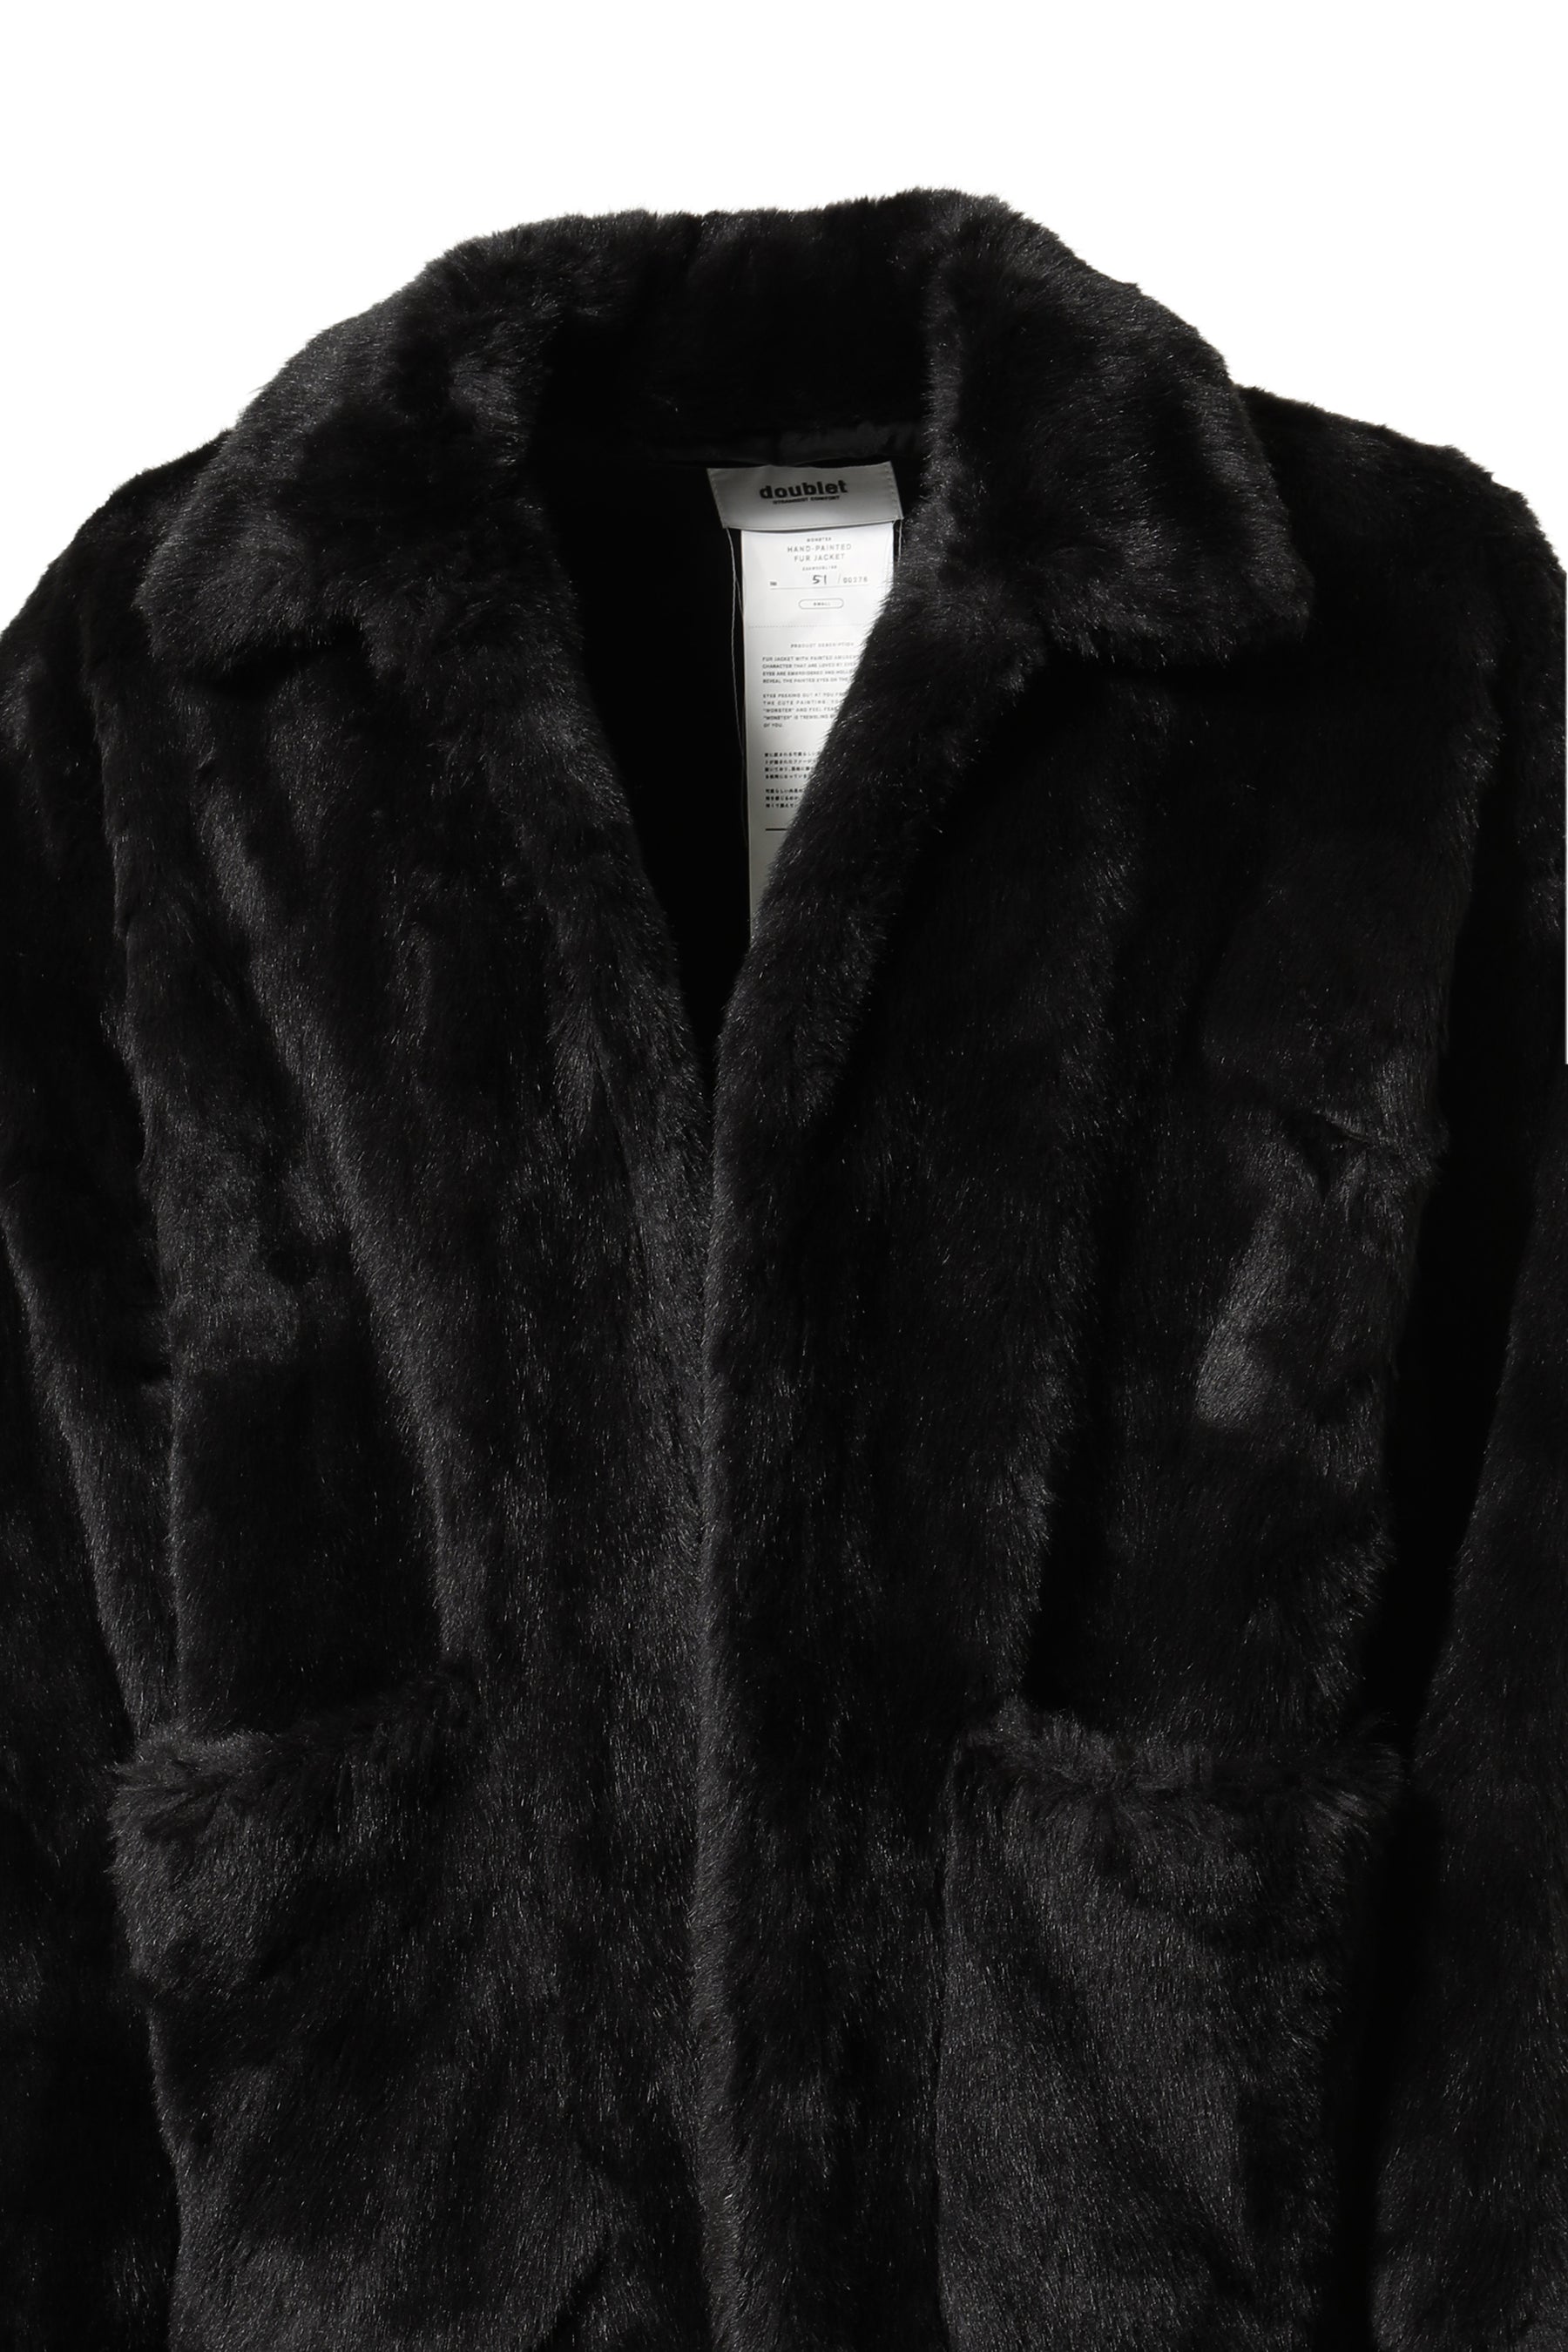 AND-PAINTED FUR JACKET / BLK